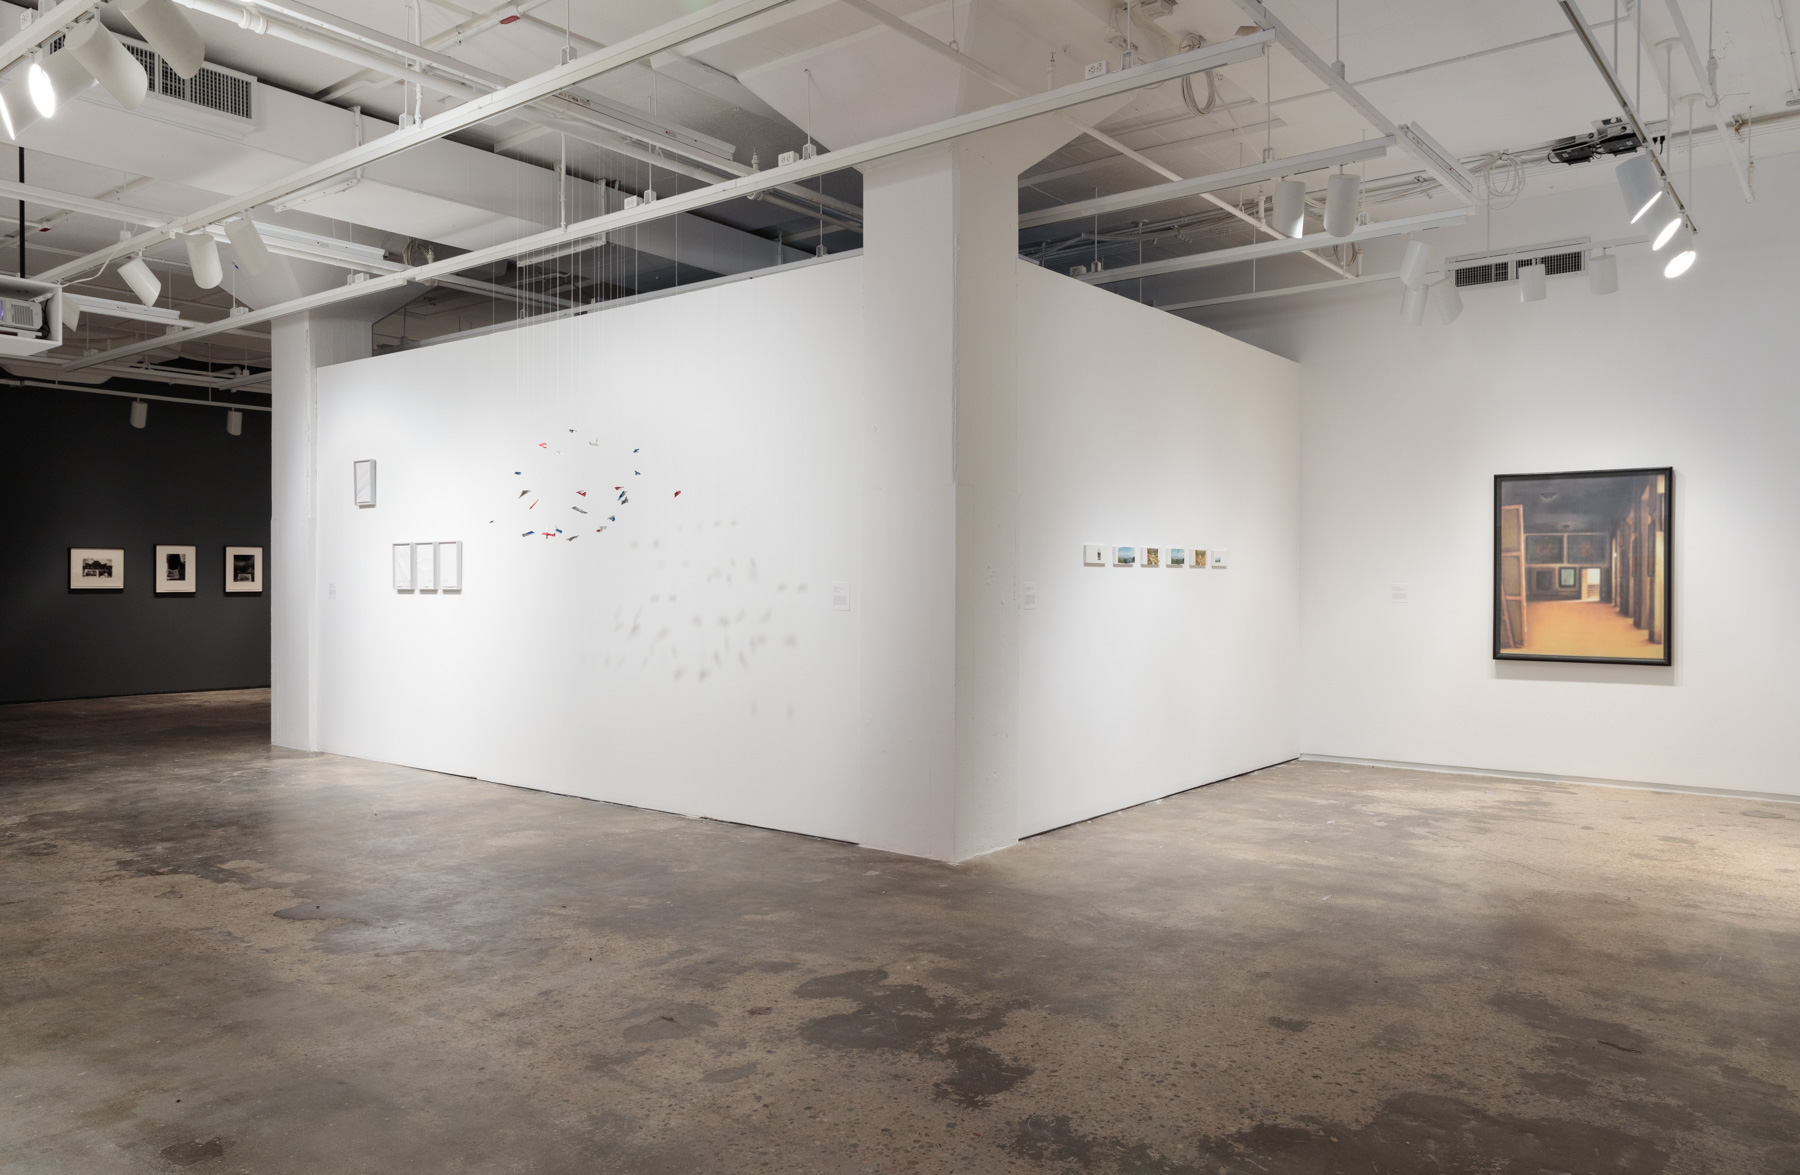  Installation View:&nbsp; Copy, Translate, Repeat: Contemporary Art from the Colección Patricia Phelps de Cisneros , Hunter College Art Galleries, 2018. Photo by Stan Narten.&nbsp; 